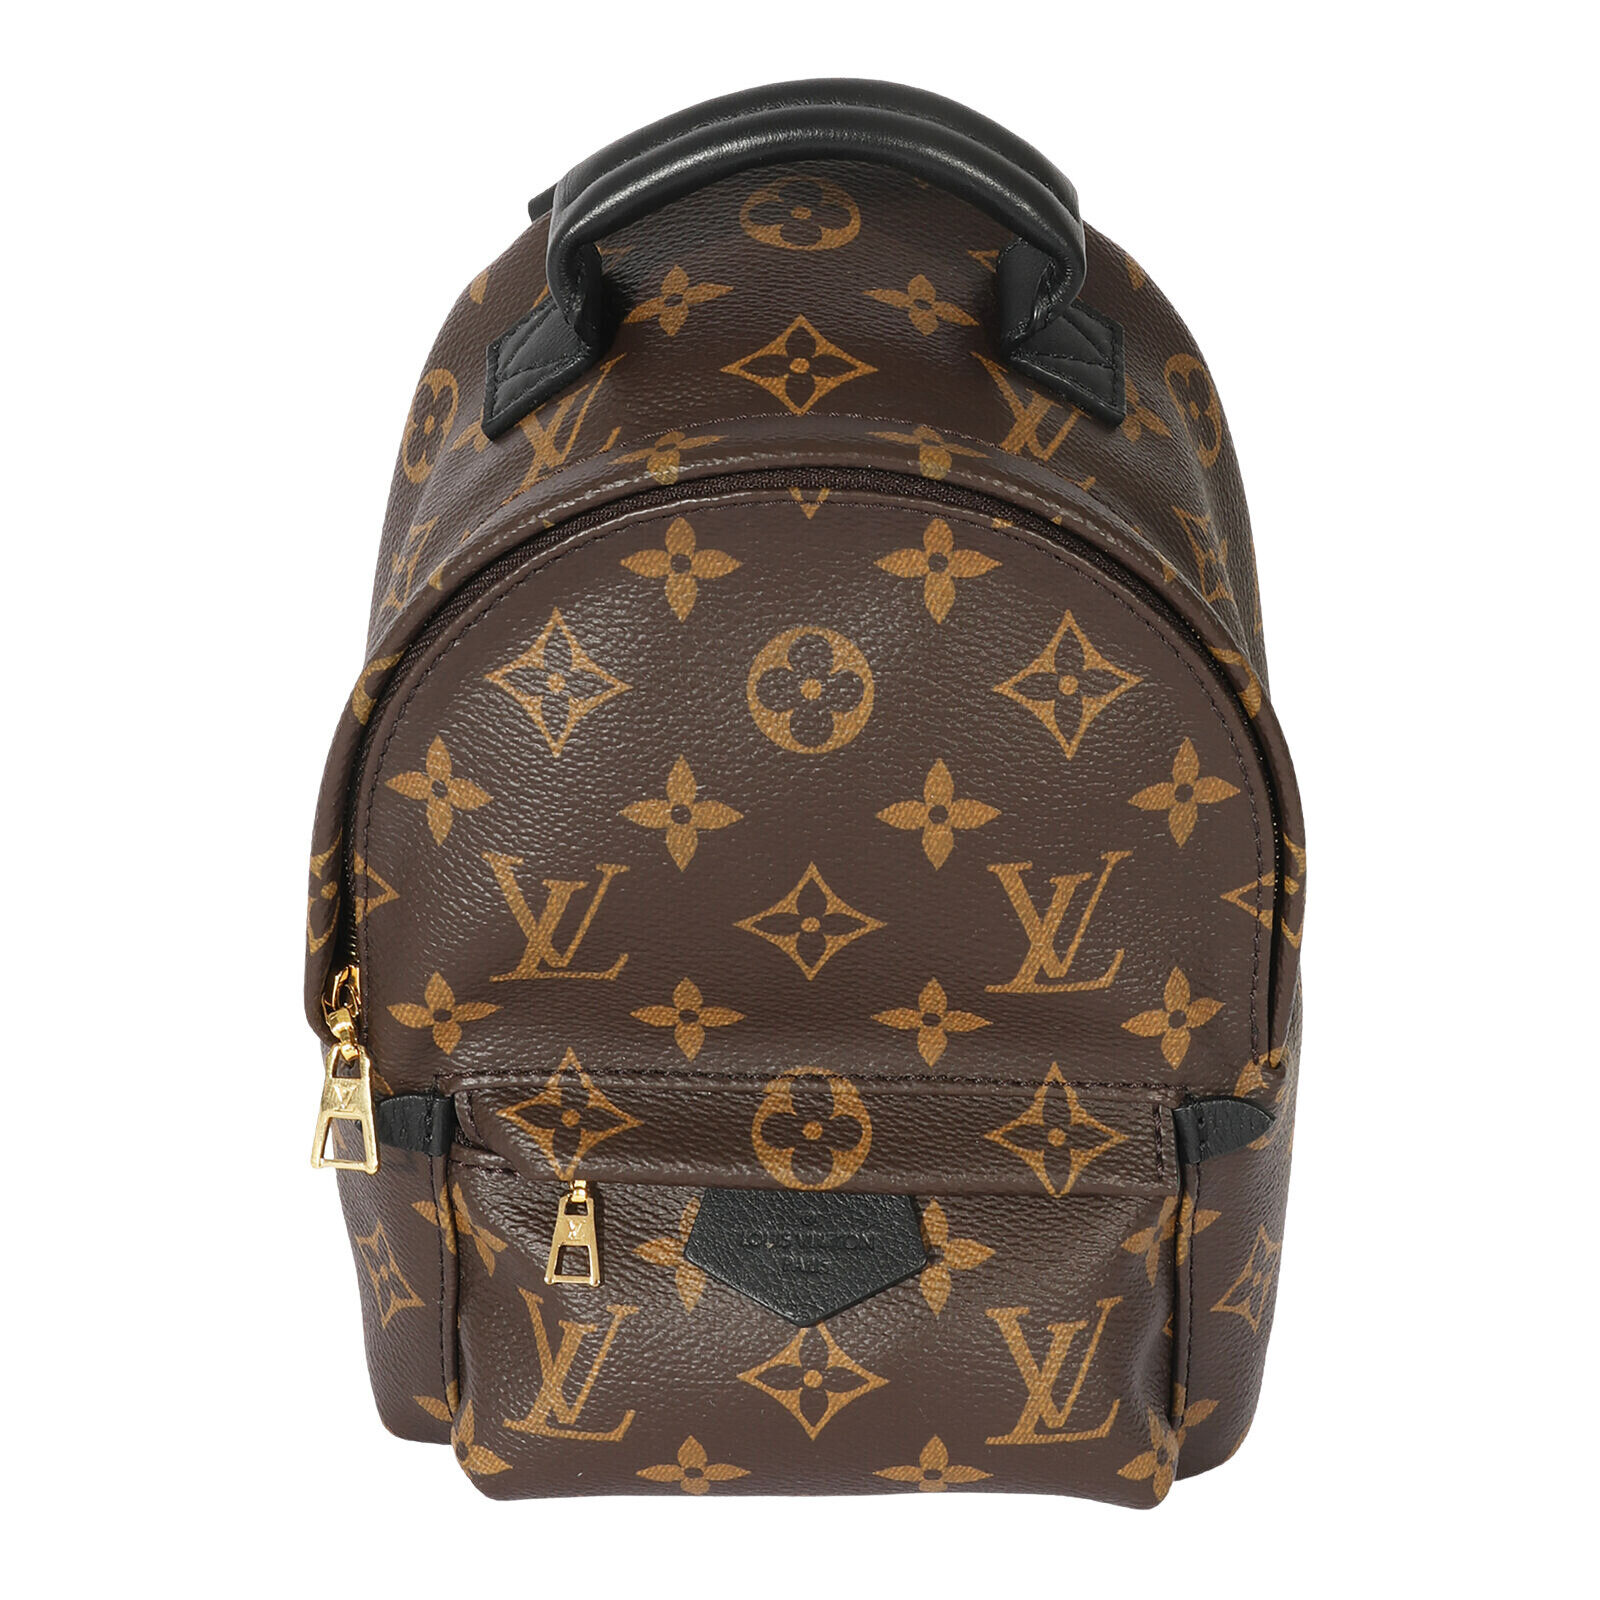 Vuitton Palm Backpack Brown Canvas for sale online | eBay